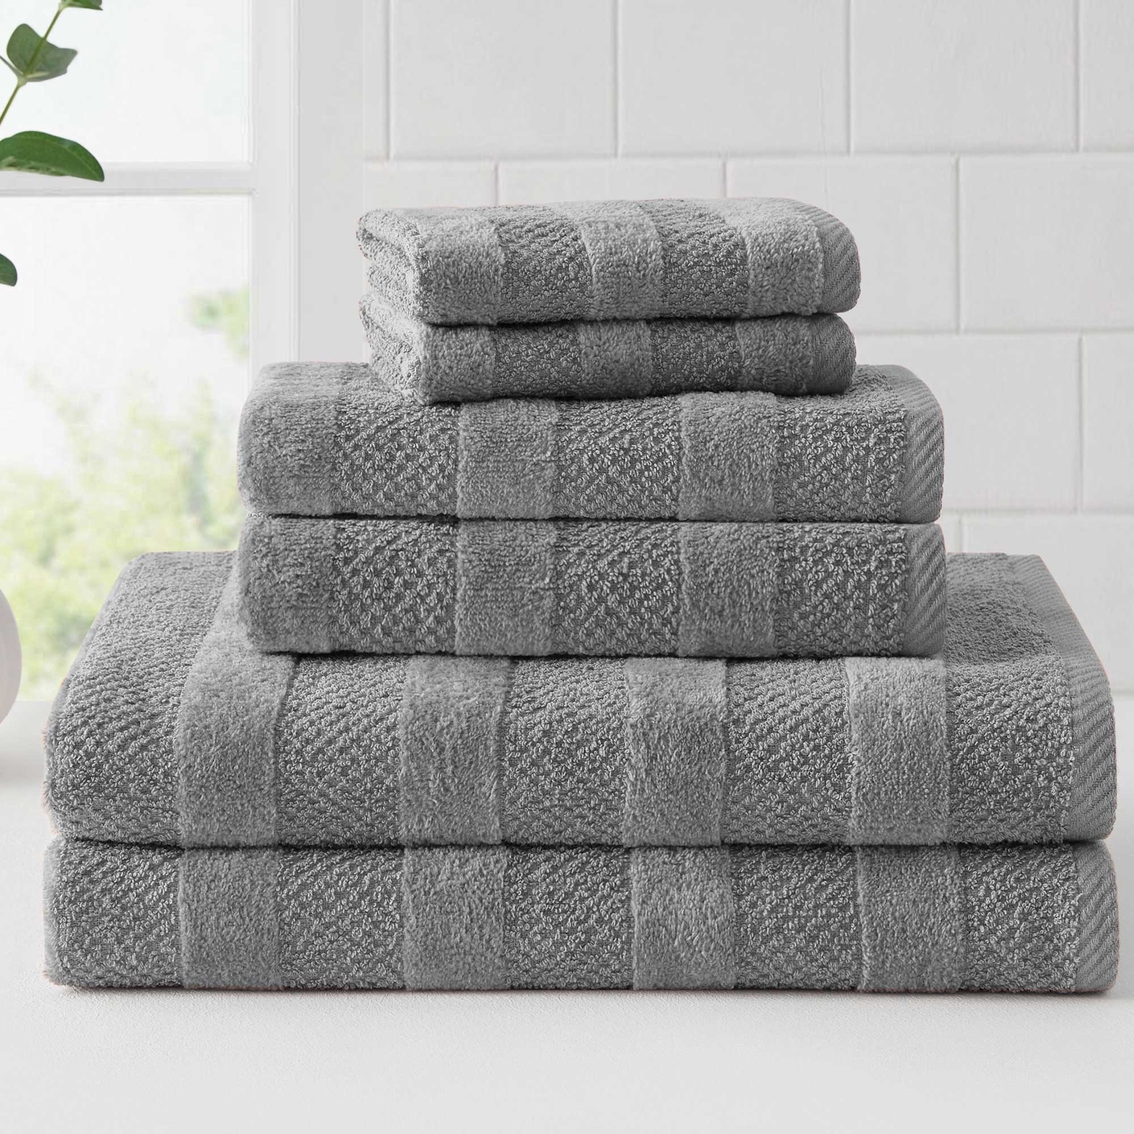 Cannon Shear Bliss Quick Dry 2 pk. Bath Towels - Image 4 of 5